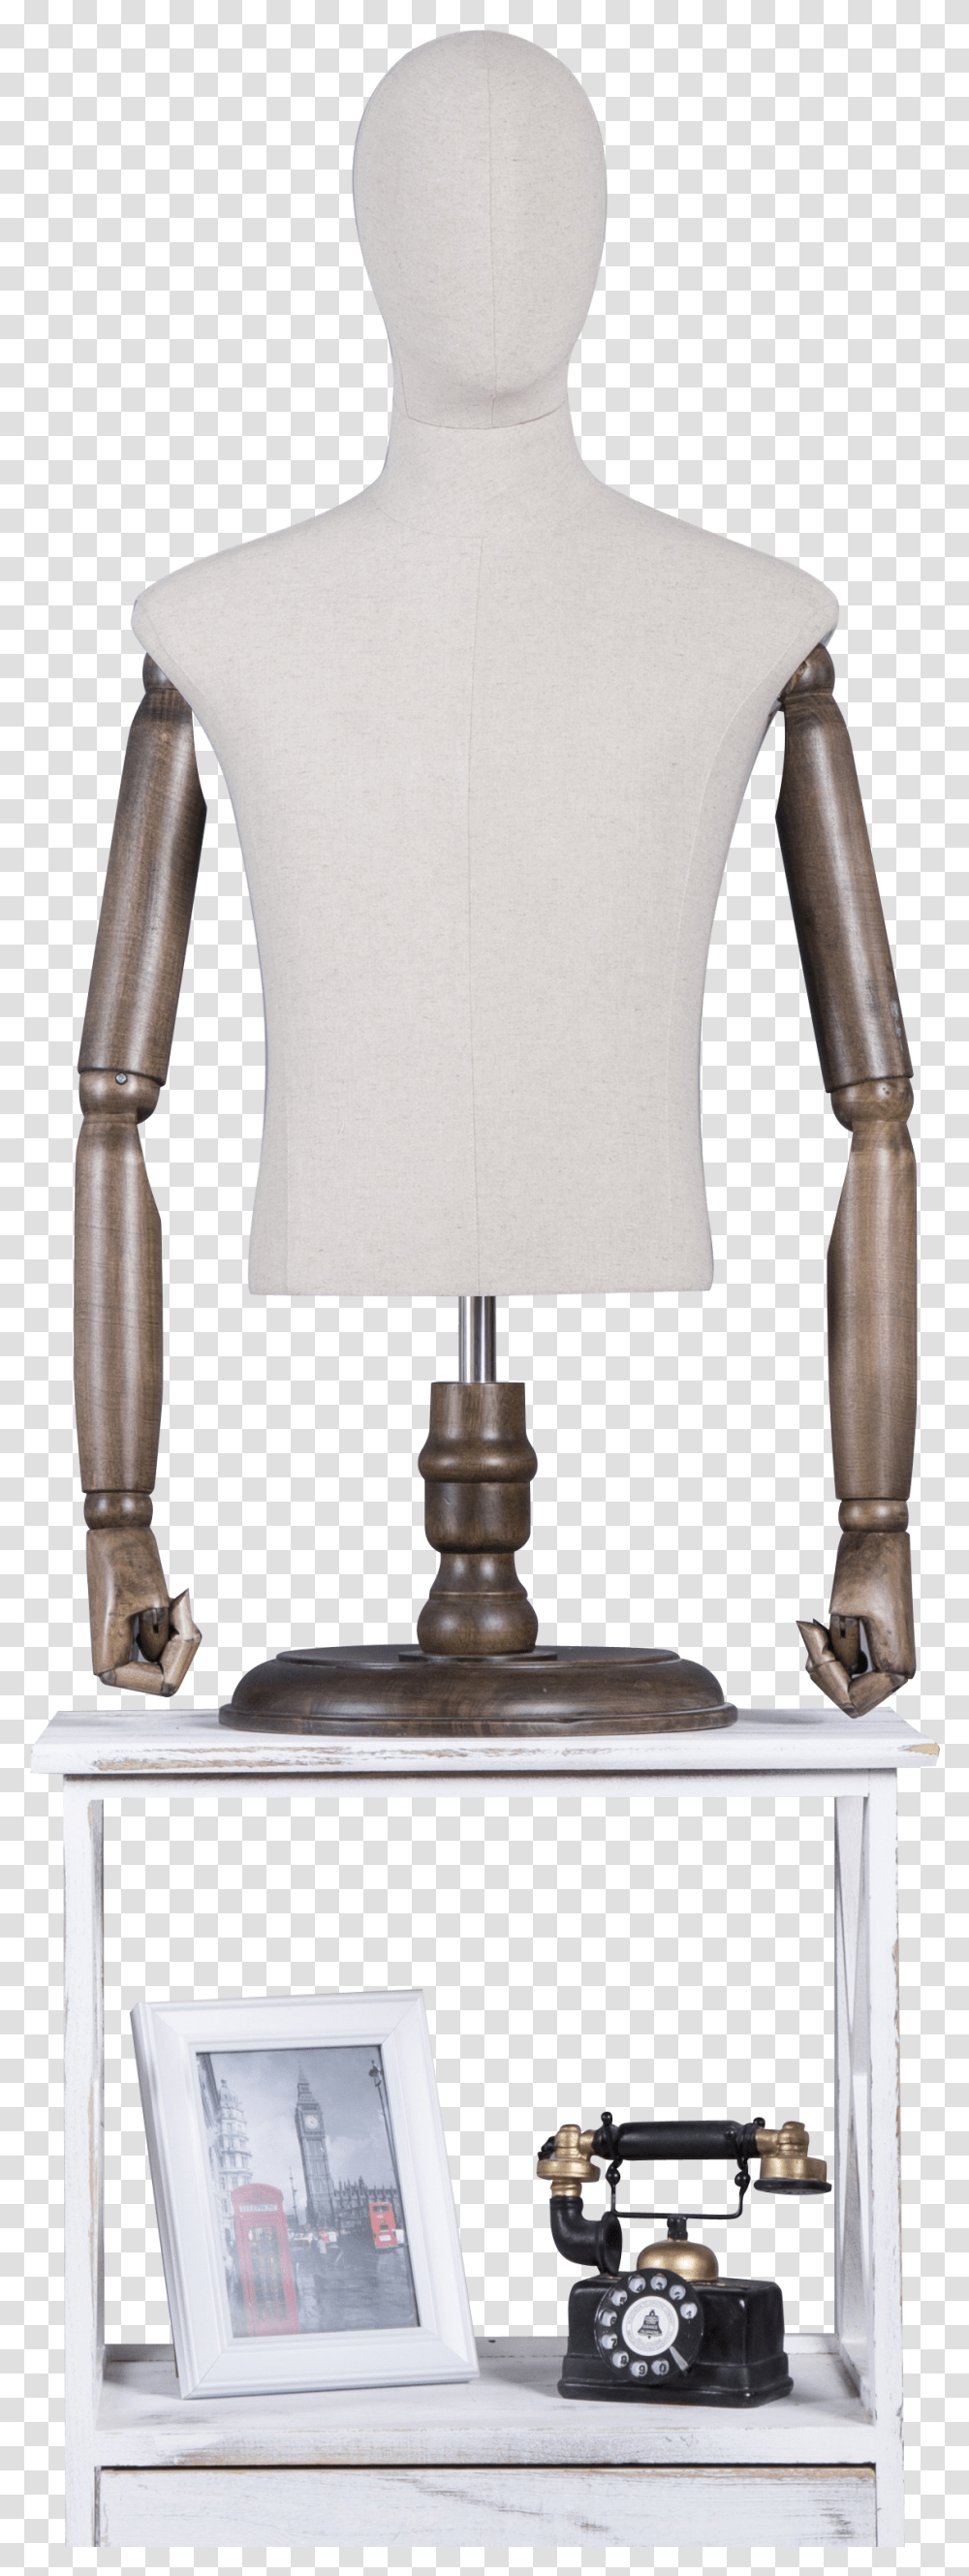 China Female Mannequin Without Head China Female Mannequin Lamp, Table Lamp, Lampshade Transparent Png